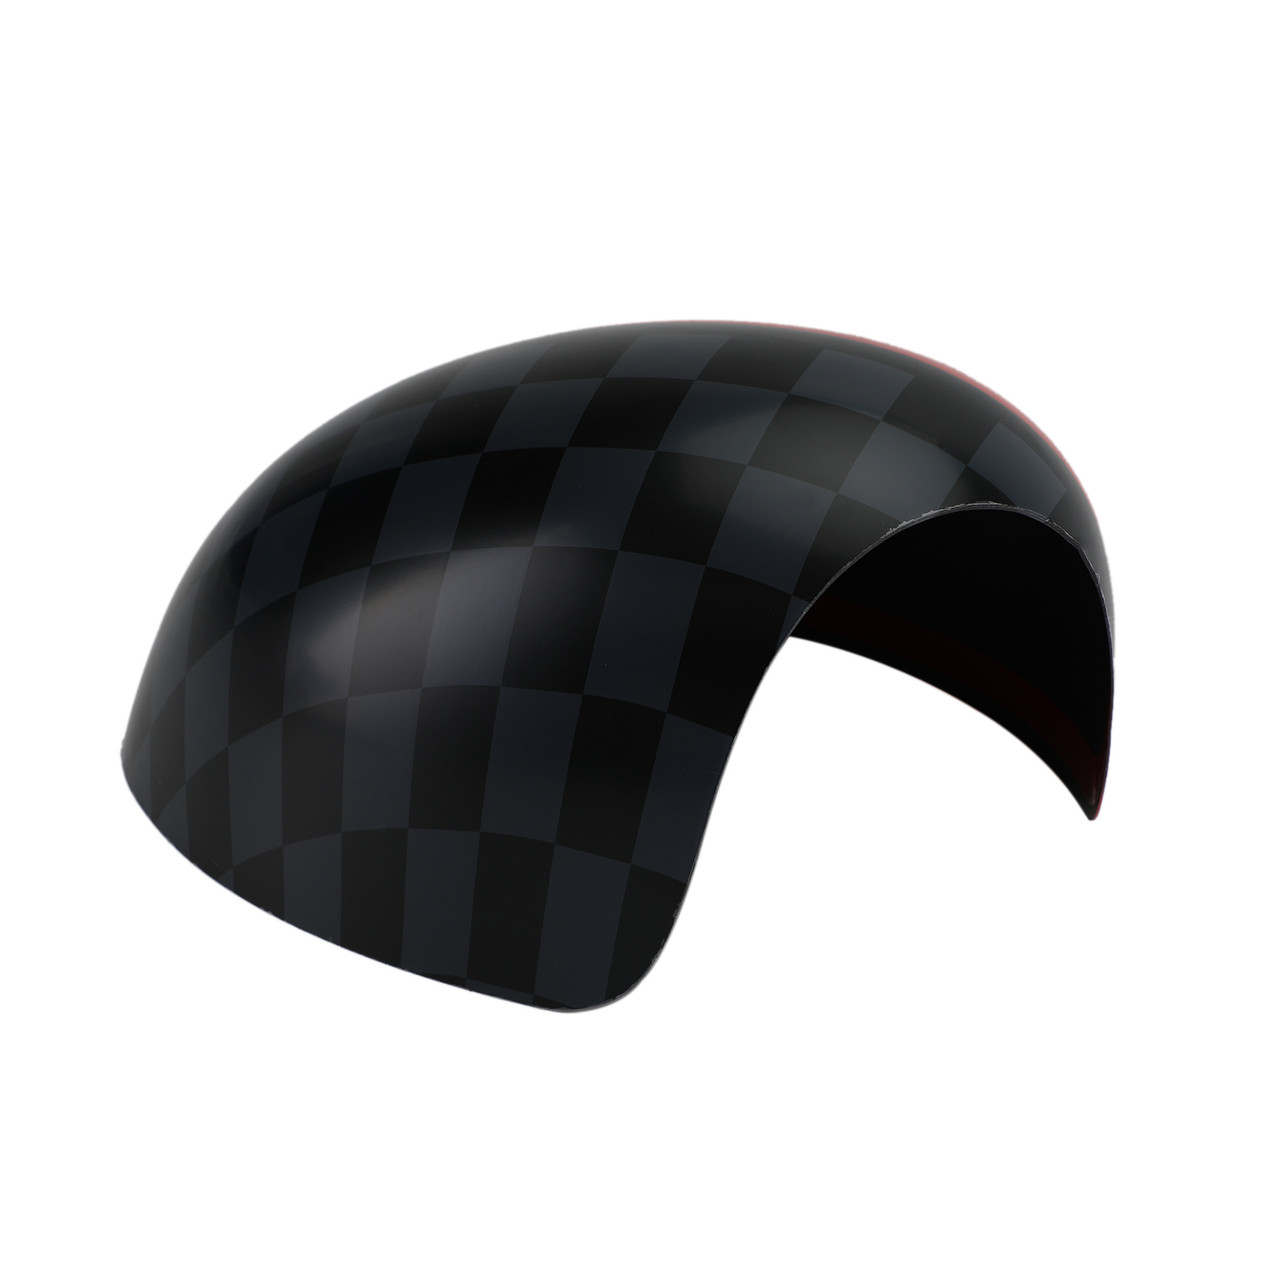 2pcs Classic Black/Grey Checkered Red Design Rear view Mirror Covers Fit For R61 2013 R55 2008-2013 R56 07-13